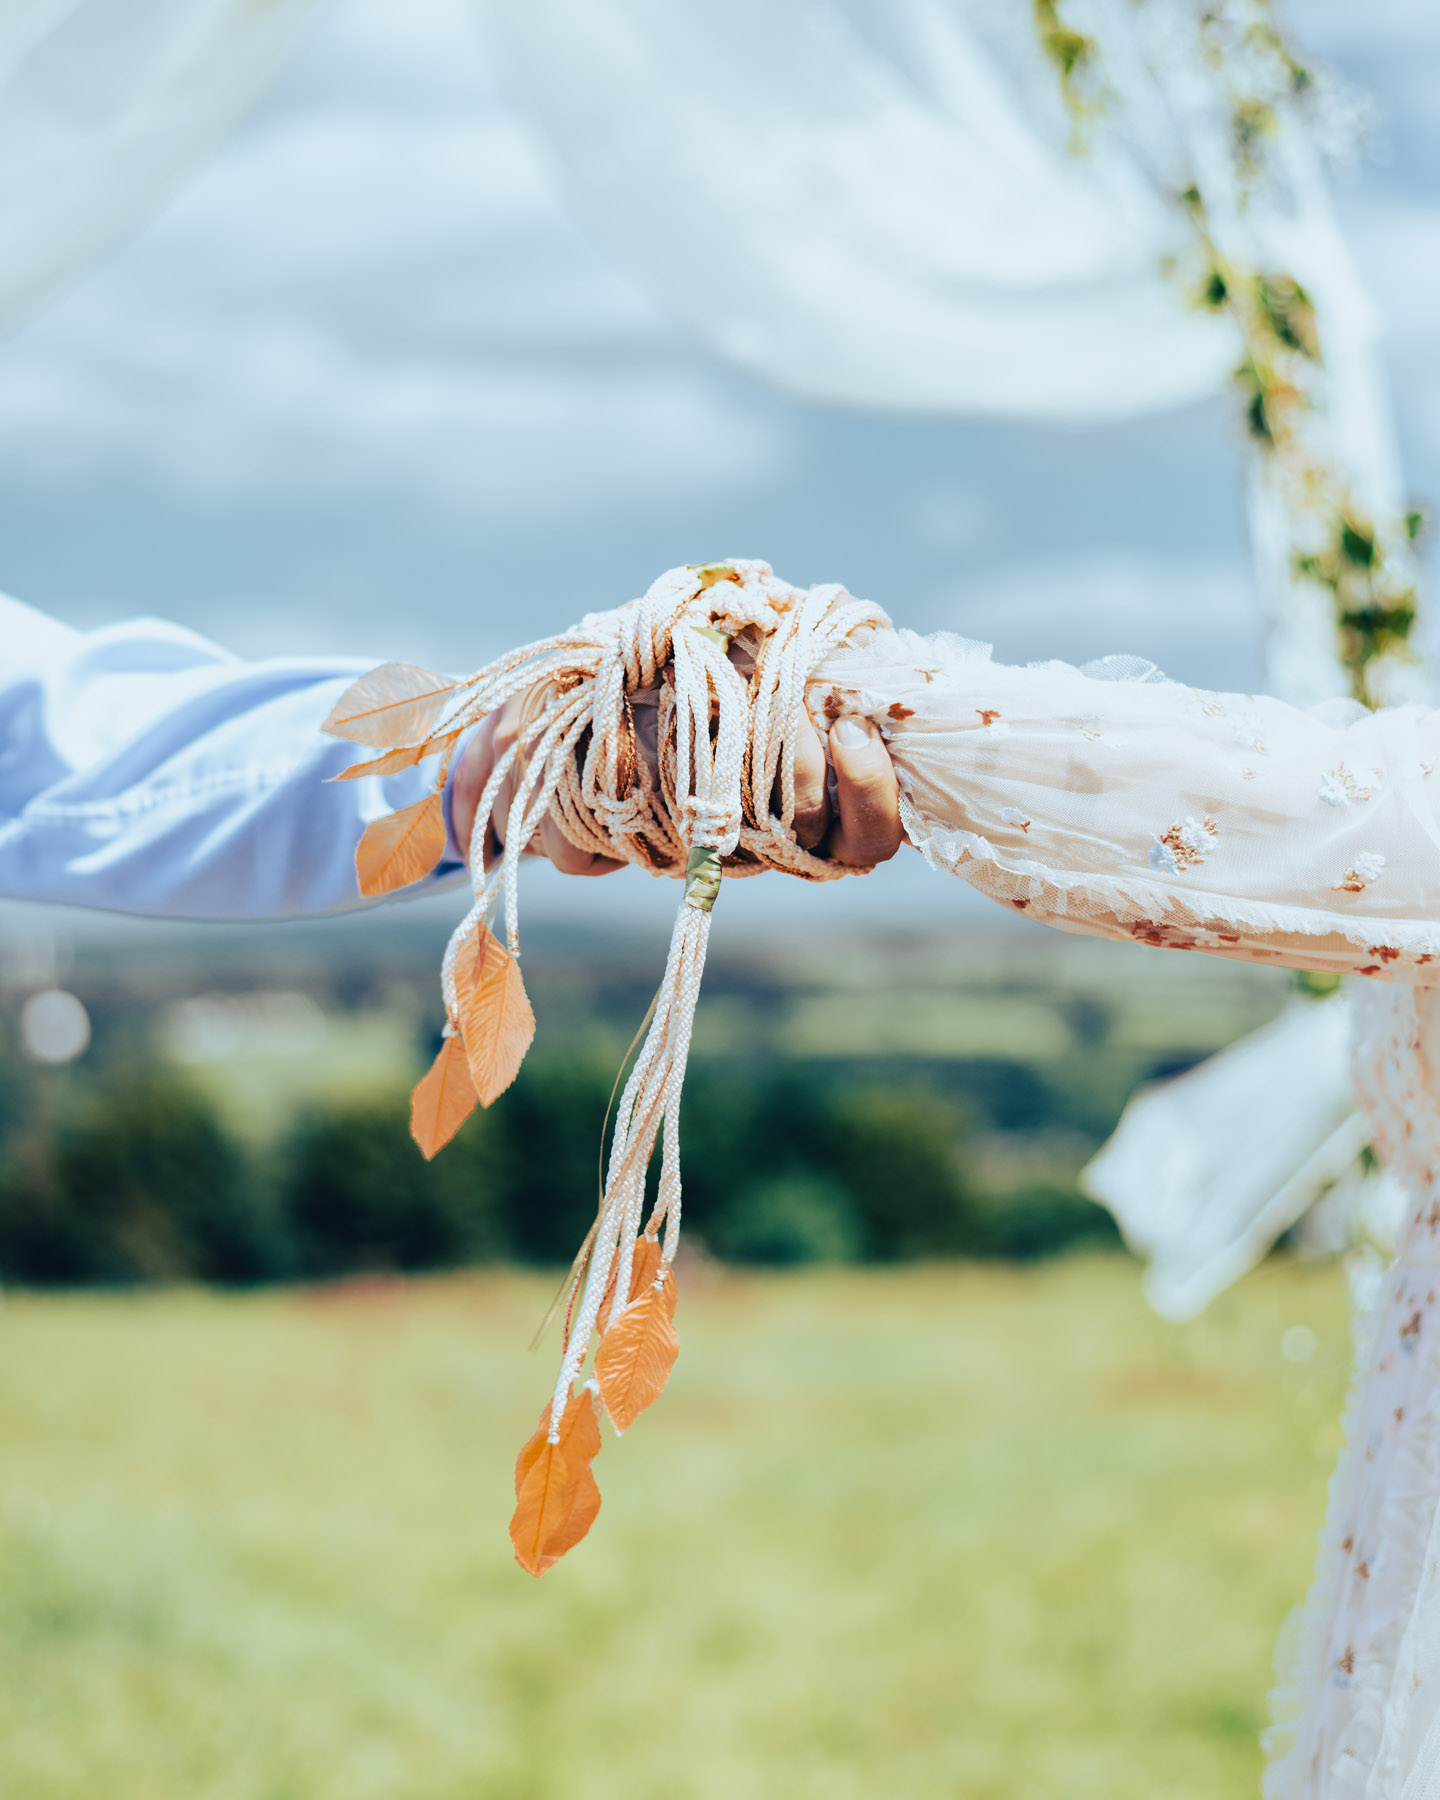 Handfasting ceremony - hands tied with a ribbon against the background of the sky and meadows